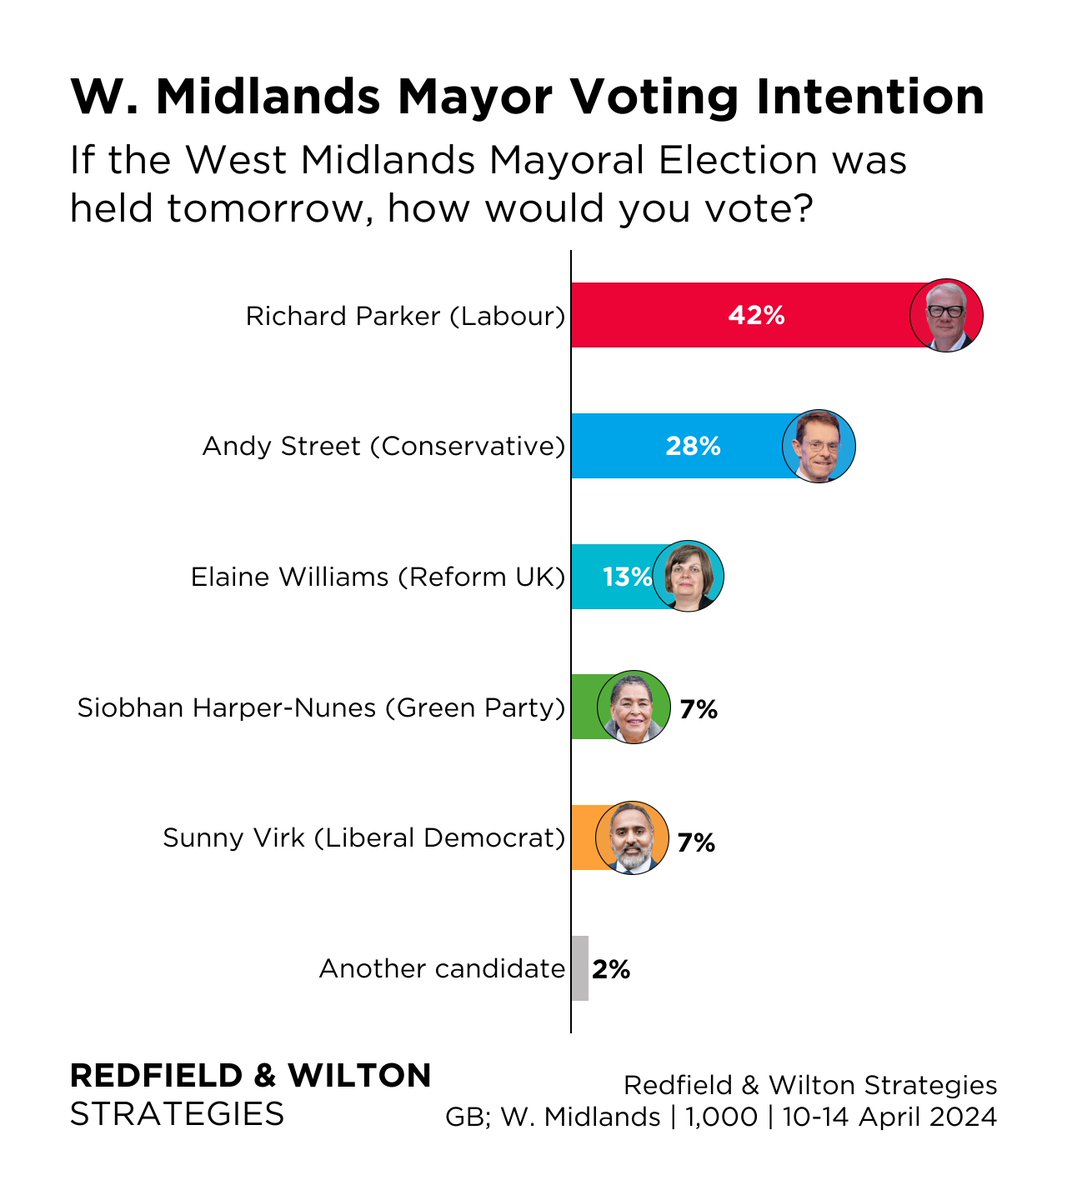 EDITOR'S NOTE: I am a born and bred proud Brummie. #AndyStreet as Mayor has been FANTASTIC for our region. Everyone loves him. This poll that puts Labour in front of @andy4wm is down to voters not wanting to vote for Rishi Sunak. You hear it at every door. Wake up MPs. #LETTERS